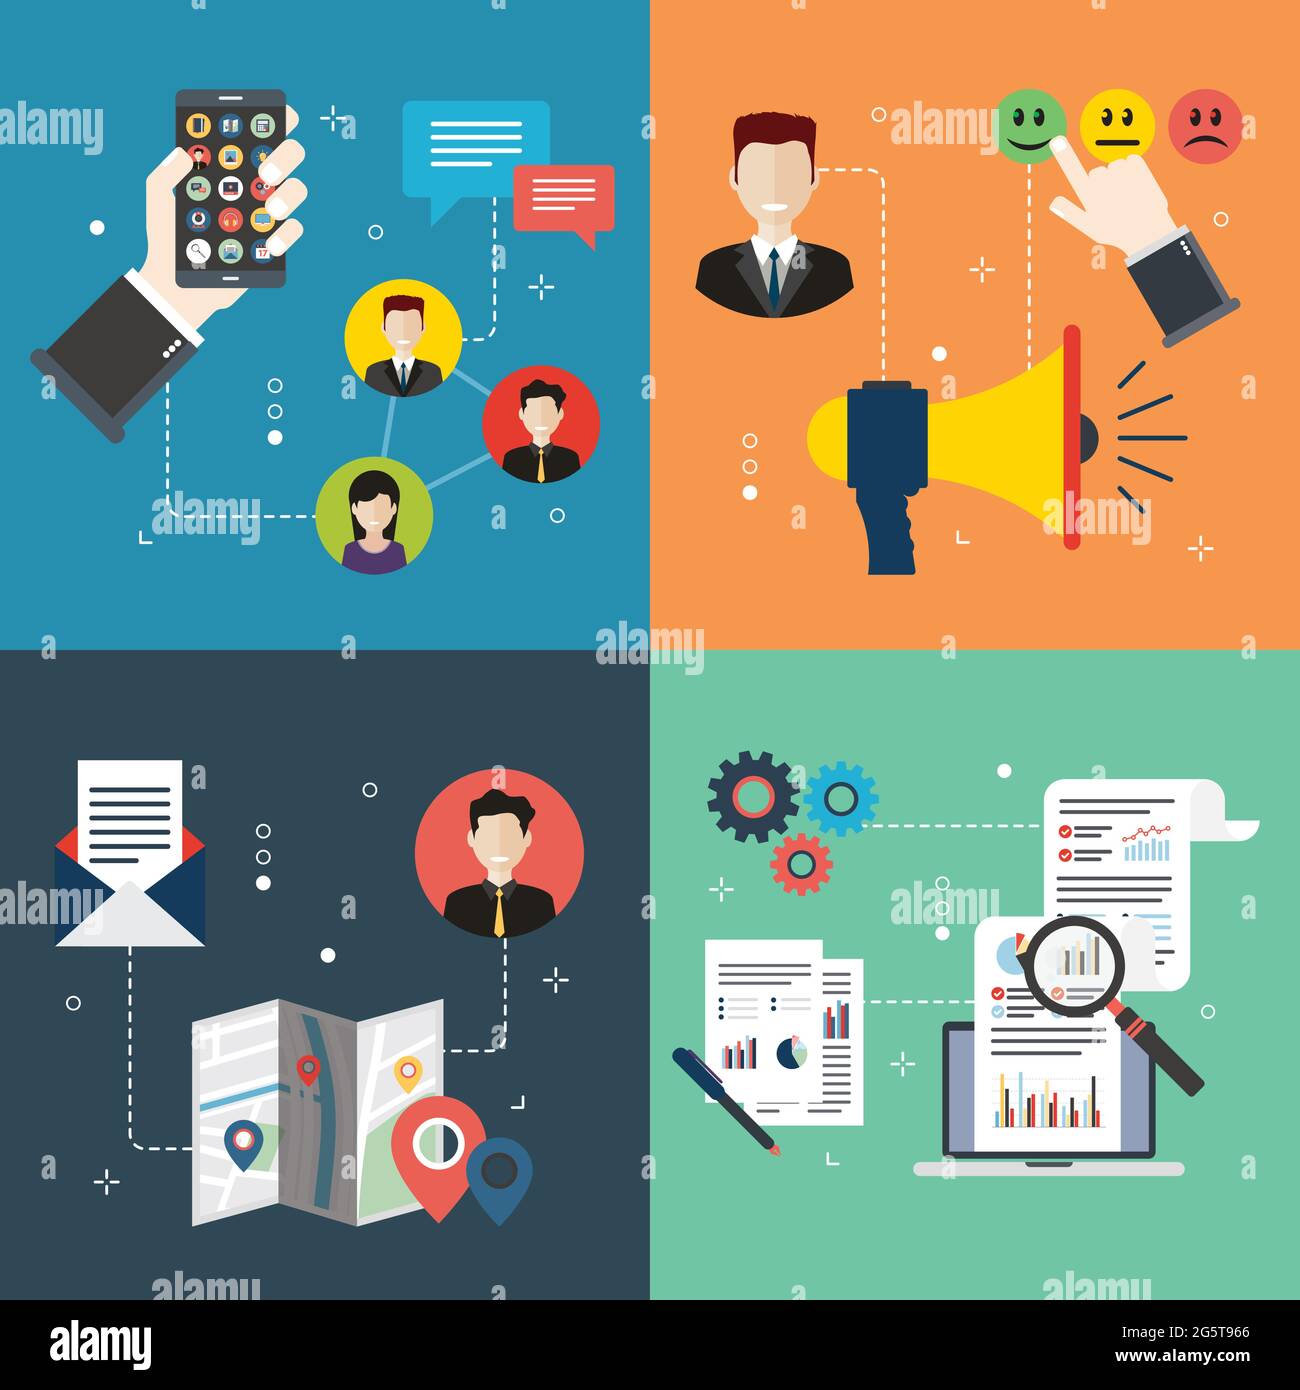 Marketing, communication, social media, relationship and metrics icons. Concepts of social marketing, relationship marketing, proximity marketing and Stock Vector